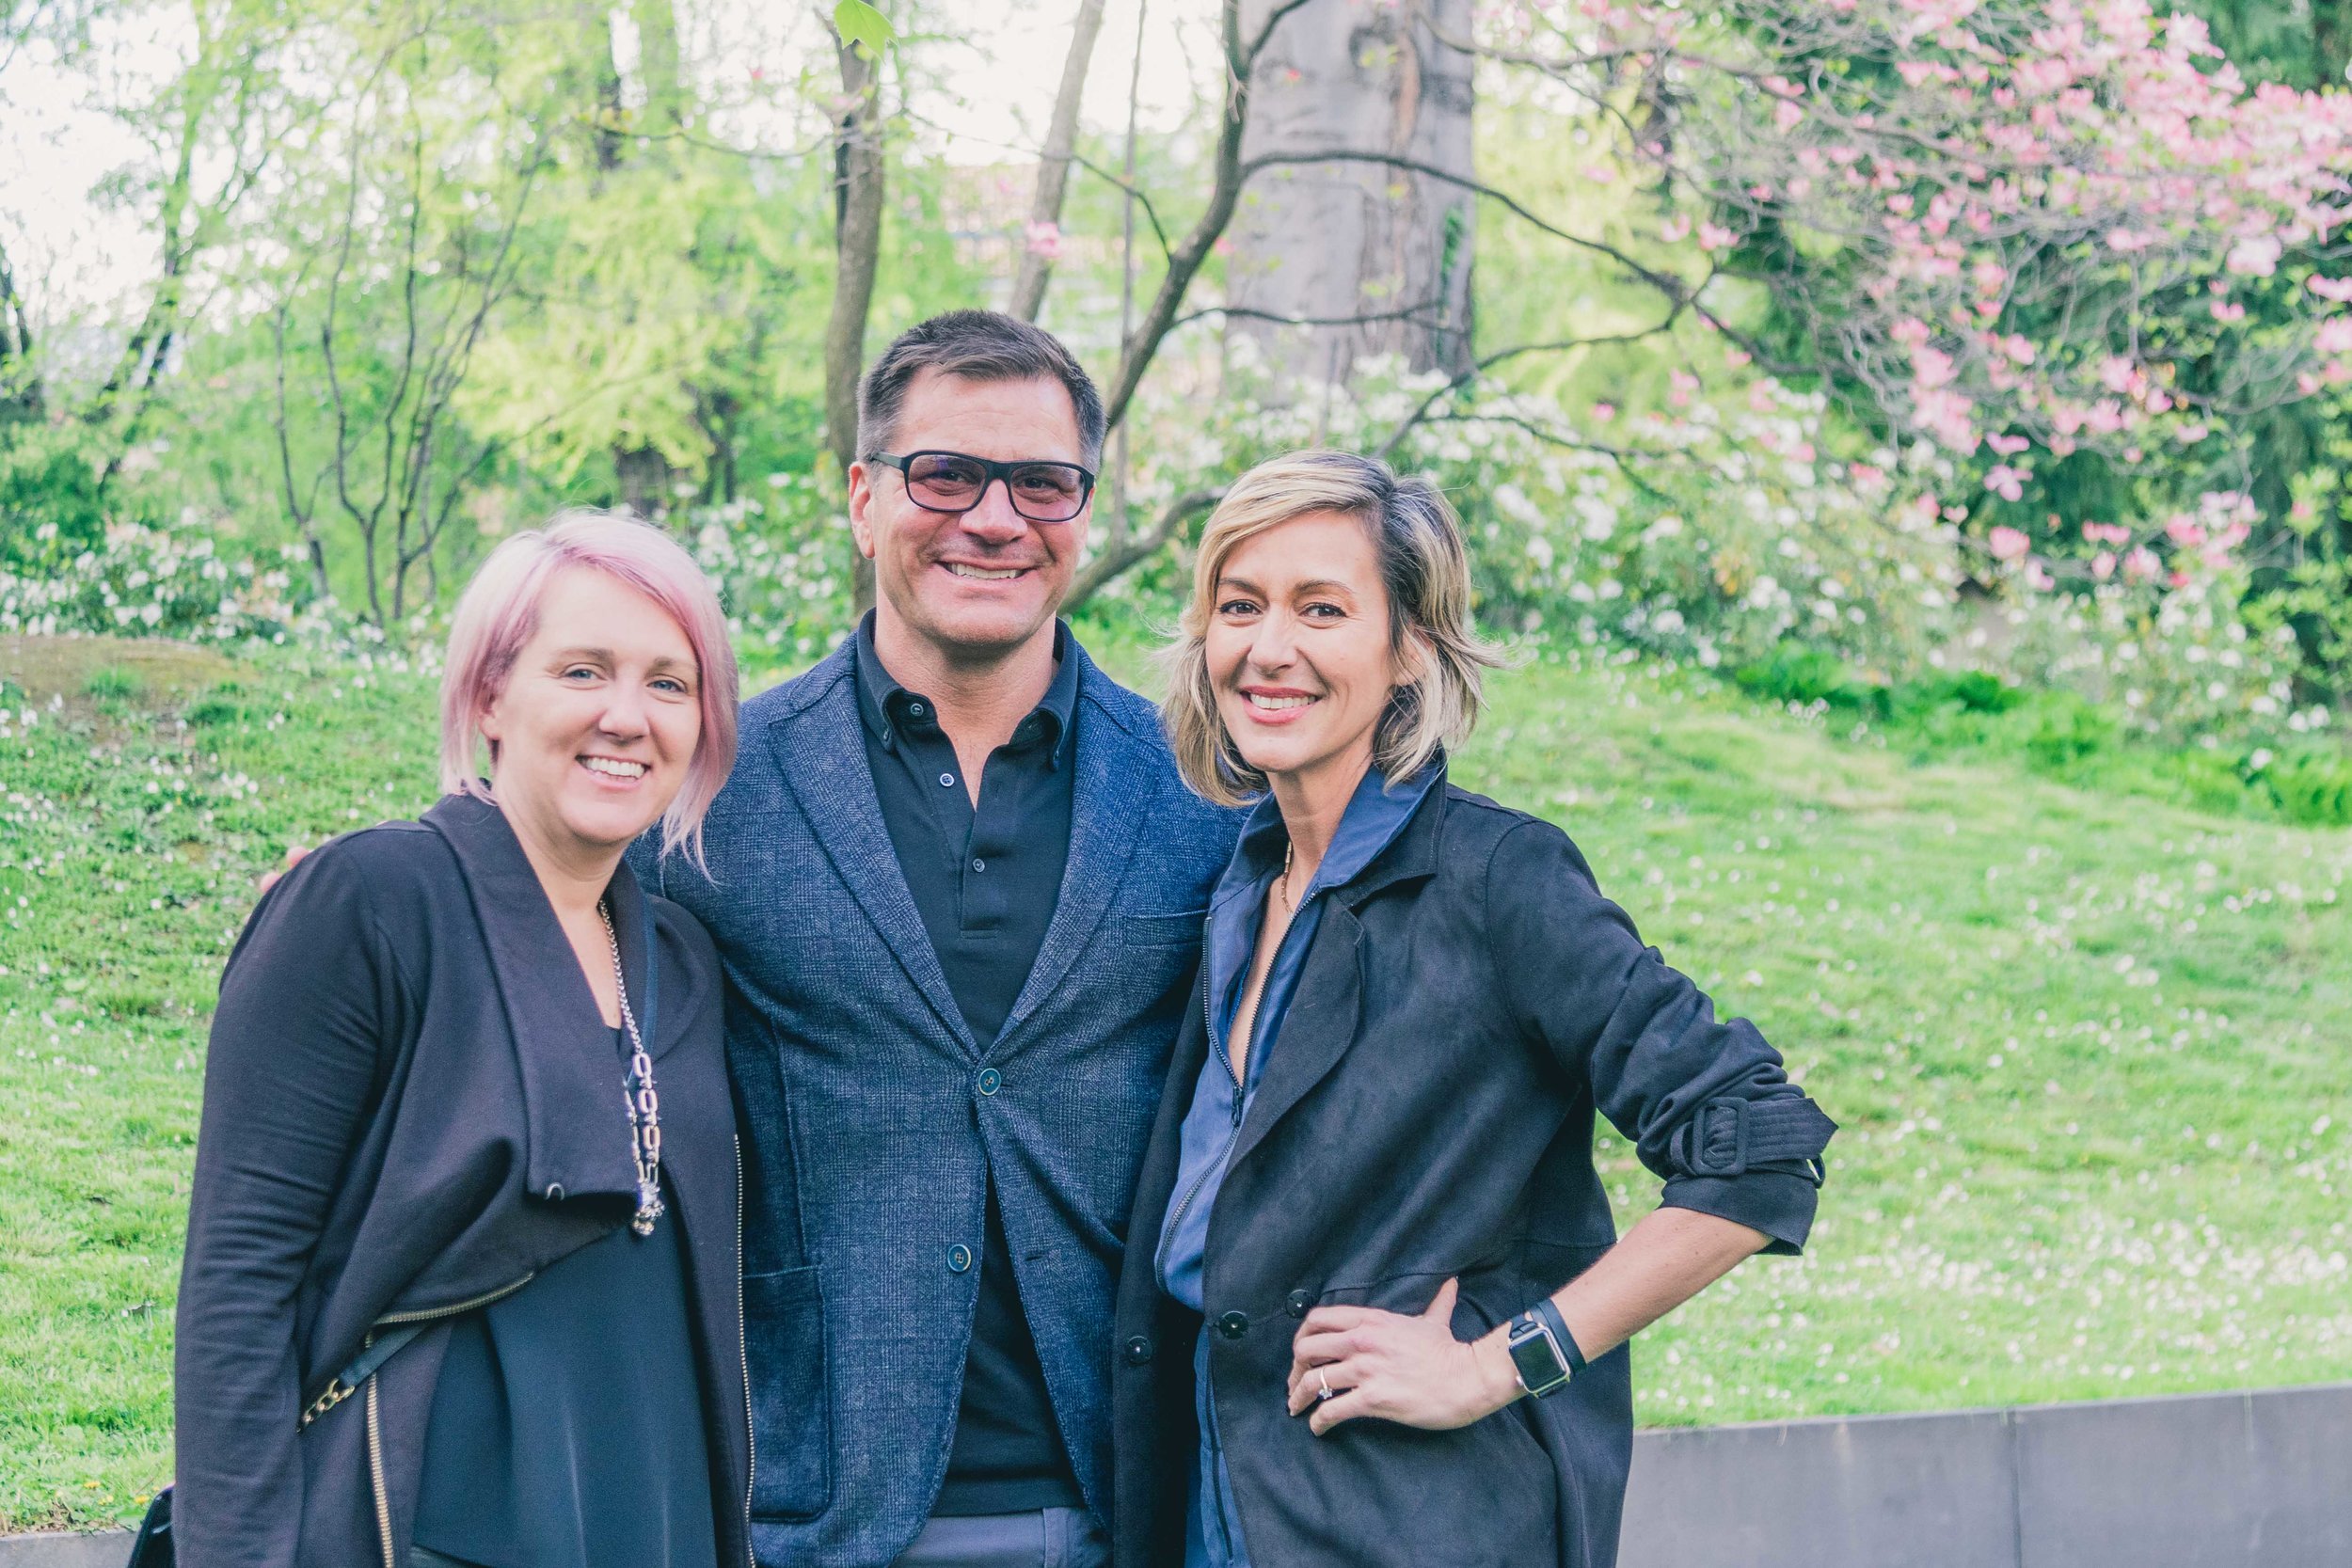  Tracy Hiner of  Black Crow Studios , interior designer  Stephan Jones  and Ginna Christensen of  GC Collaborative  at our Milan welcome party at the Bulgari Hotel this spring. Photograph by  Gintare Bandinskaite . 